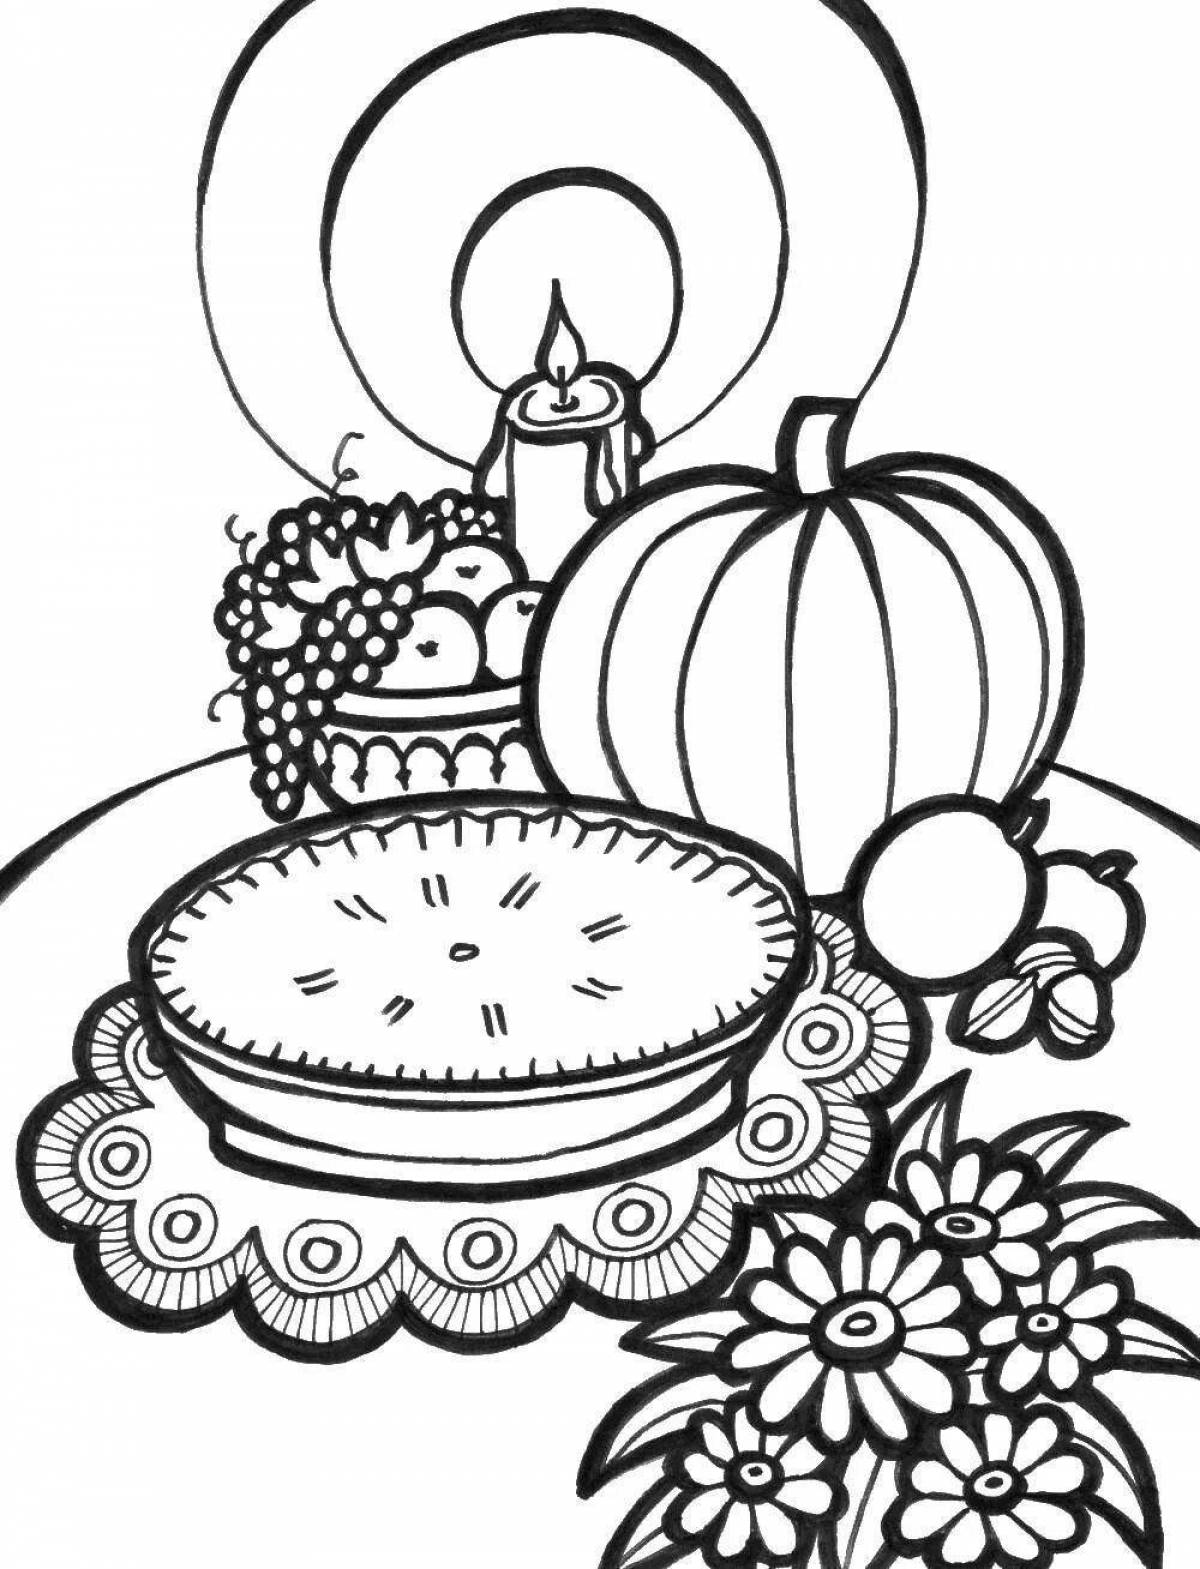 Coloring page joyful holiday table